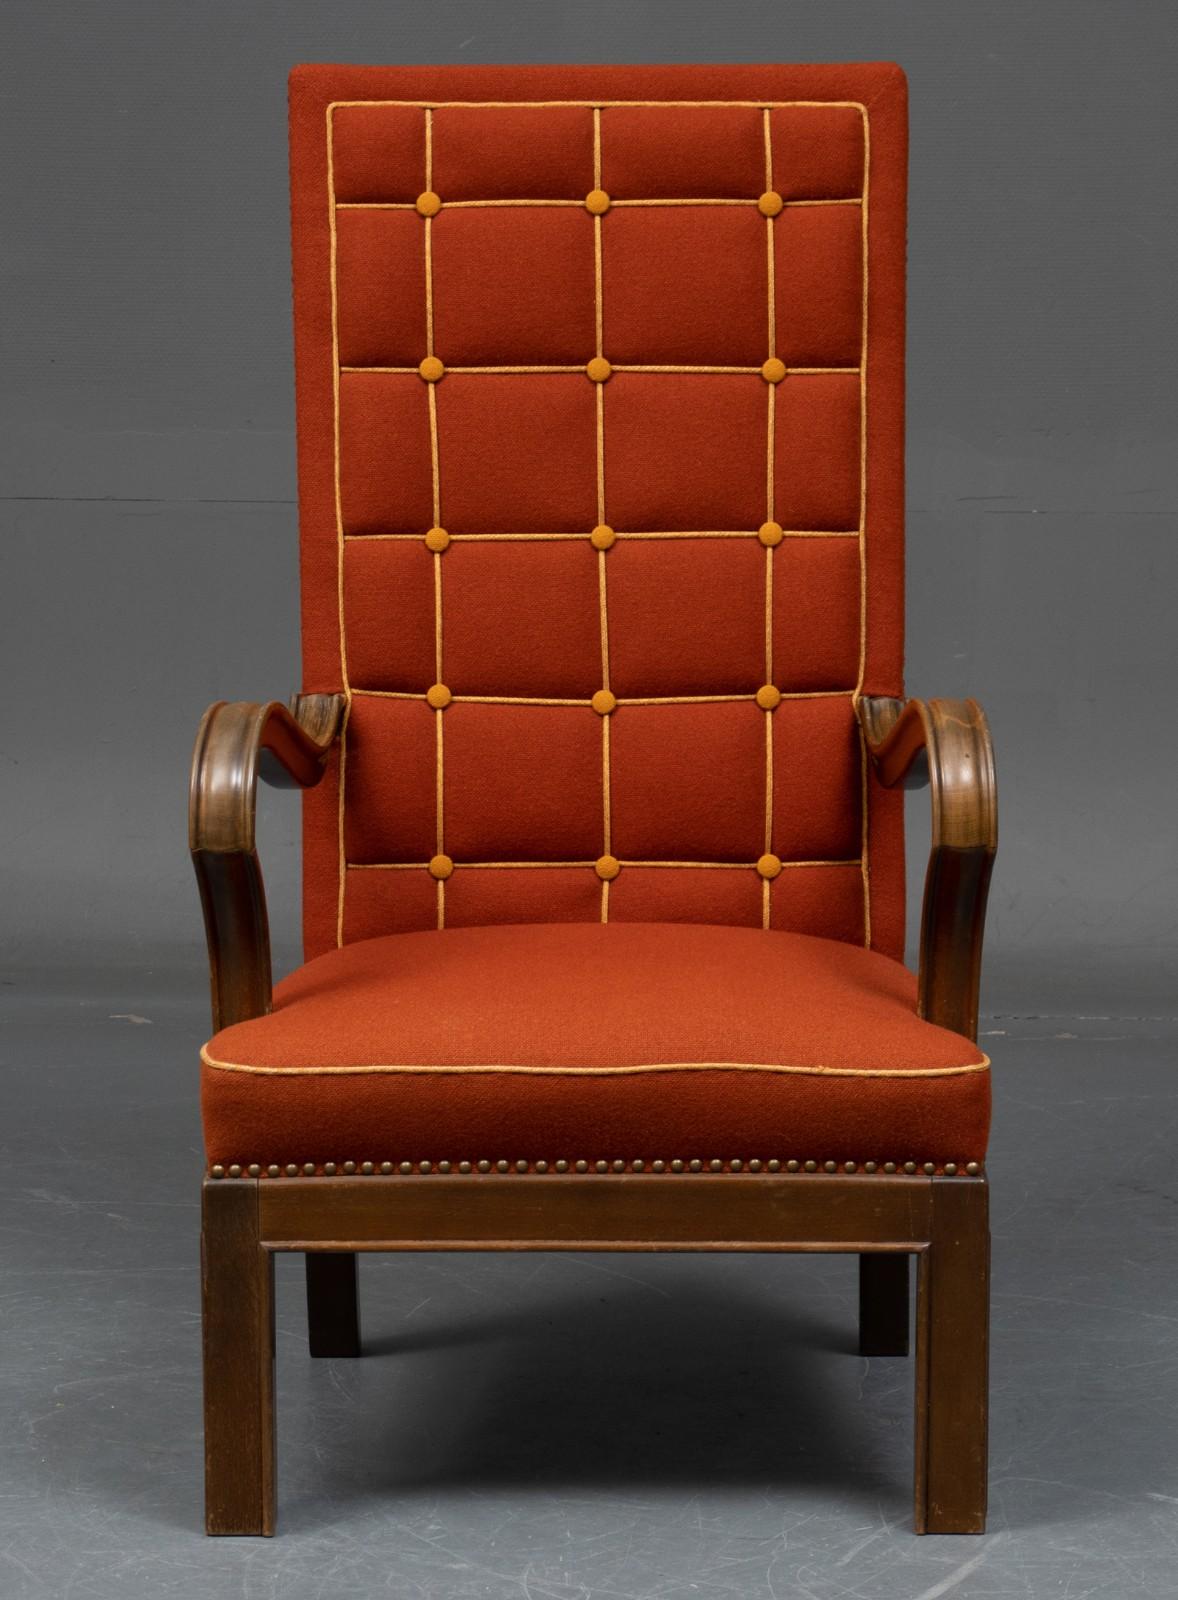 High-backed Danish modern armchair in later upholstery with dark orange Hallingdal furniture fabric from Kvadrat, designed by Nanna Ditzel. Buttoned back in squares with yellow bores. Seamless edges. Armrests and frame in stained beech.